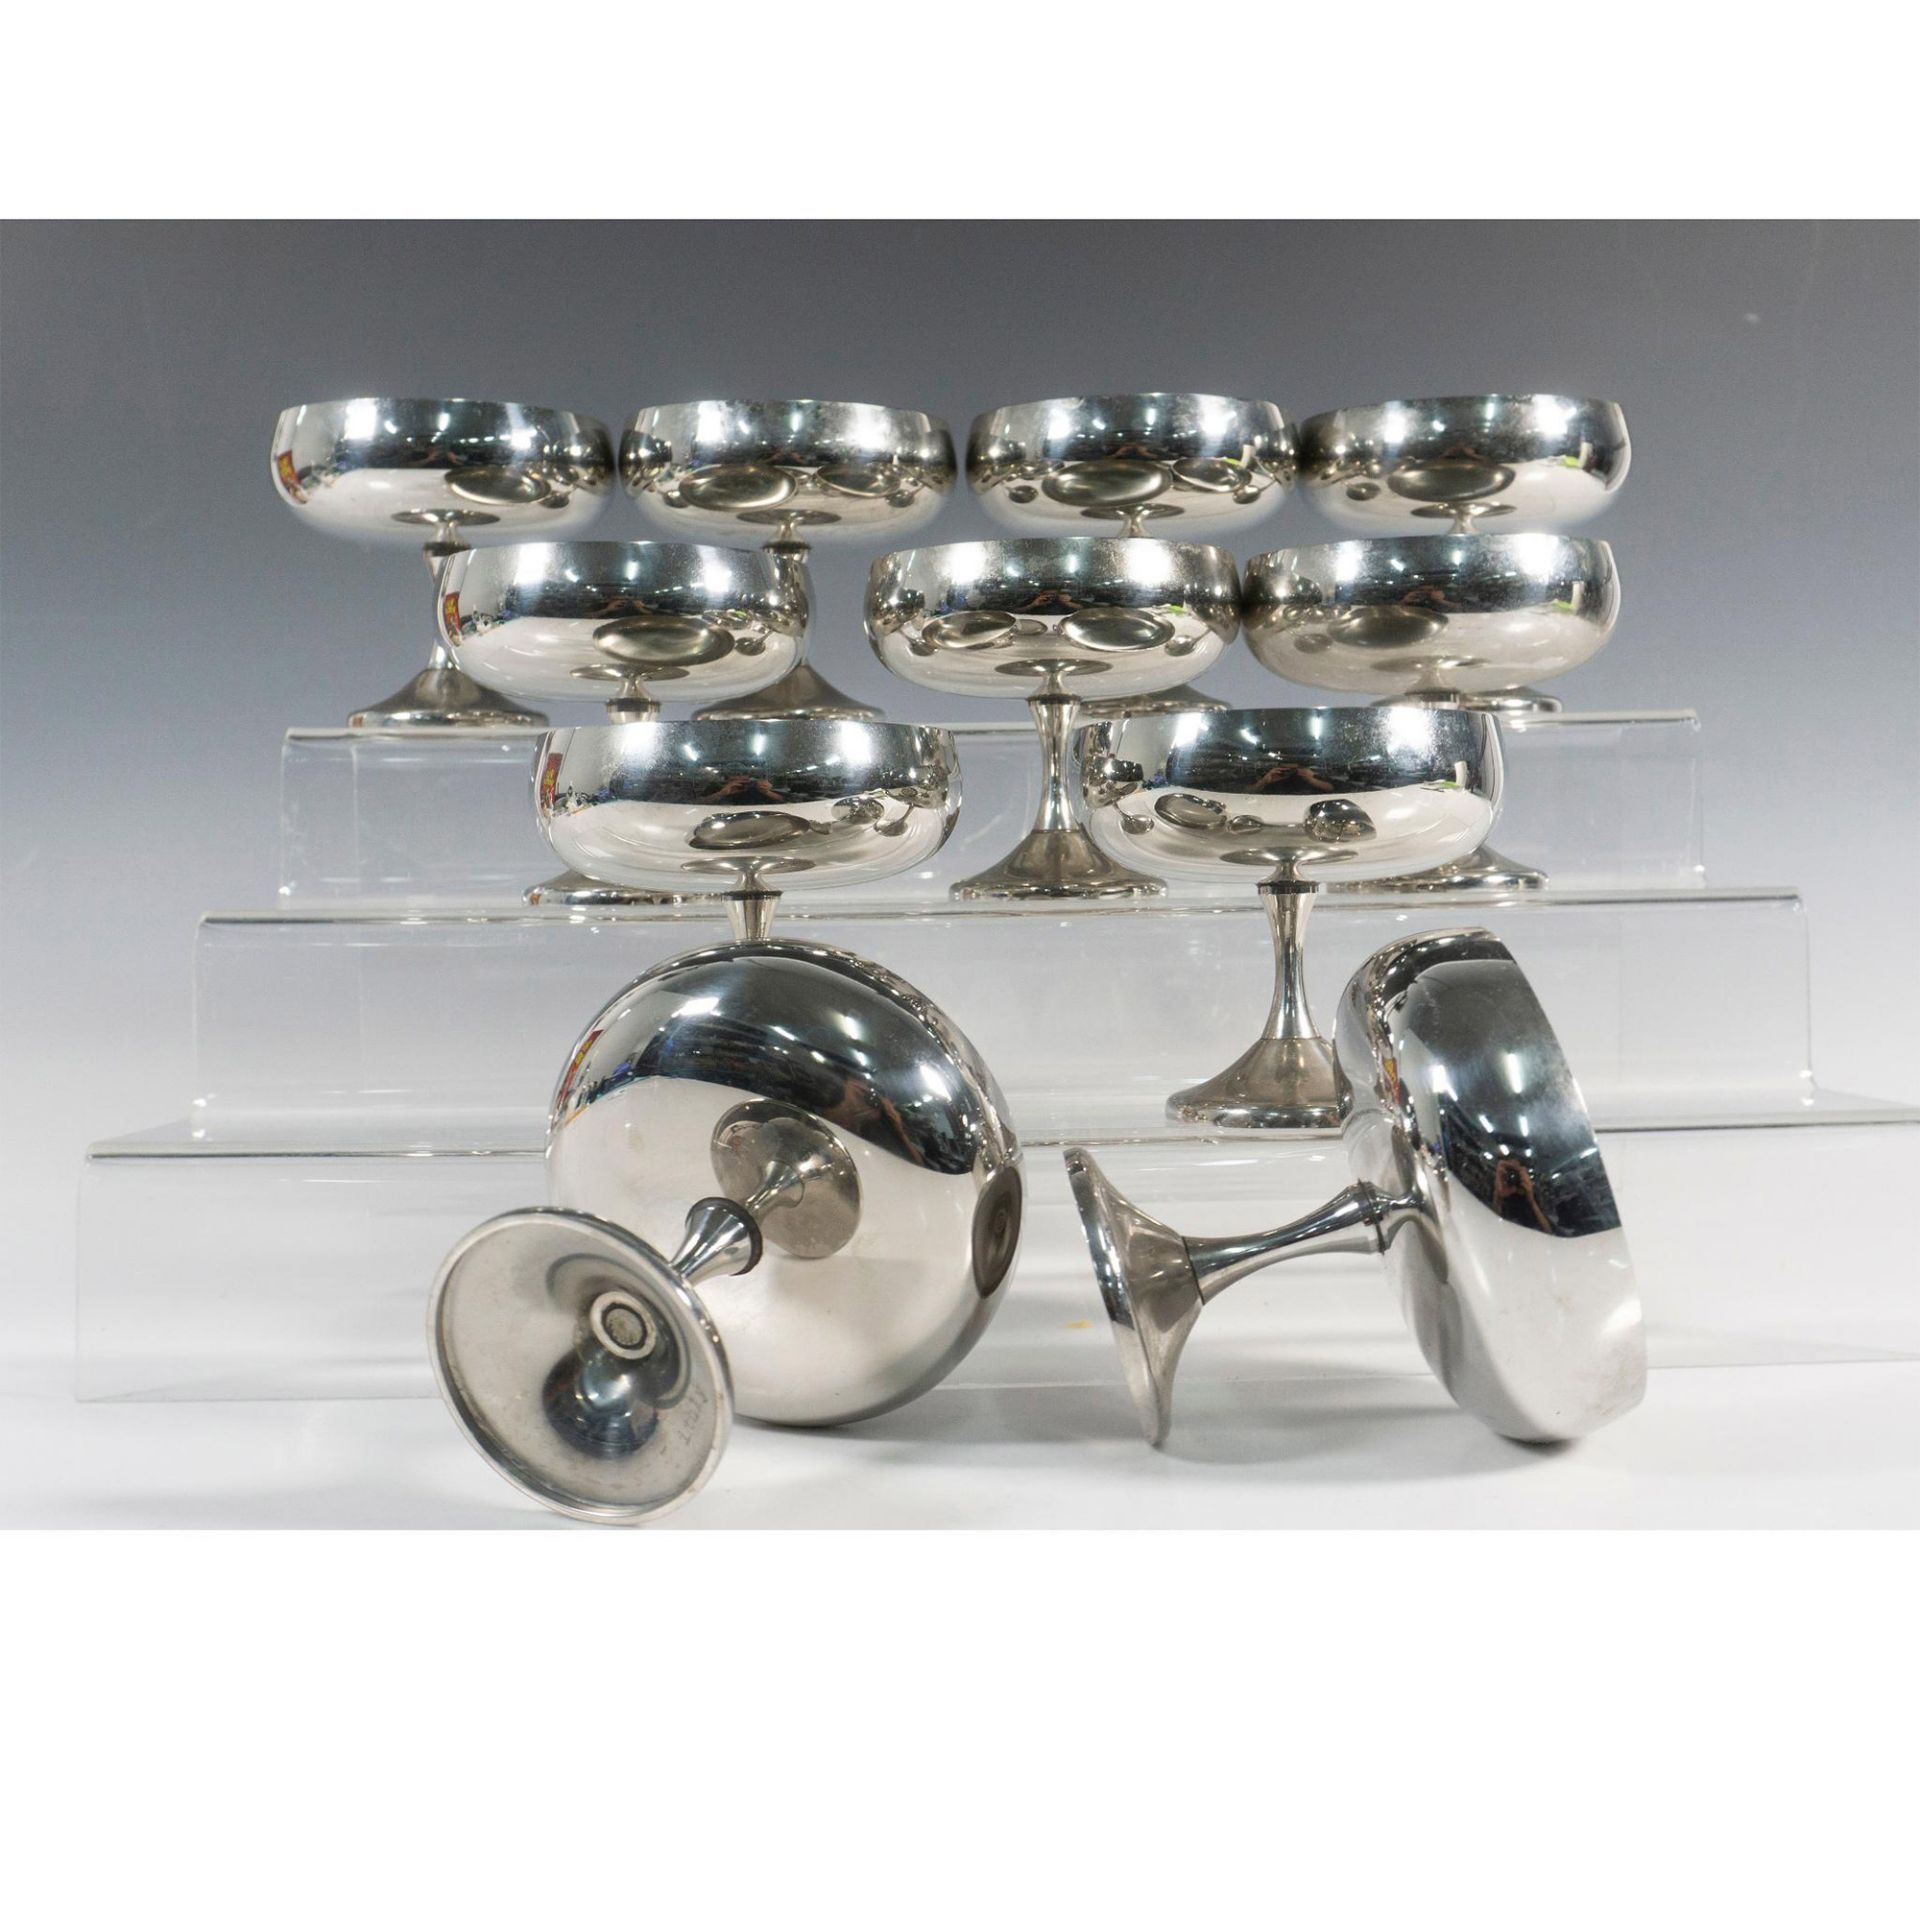 11pc Vintage Italian Stainless Steel Sorbet Bowls - Image 4 of 5